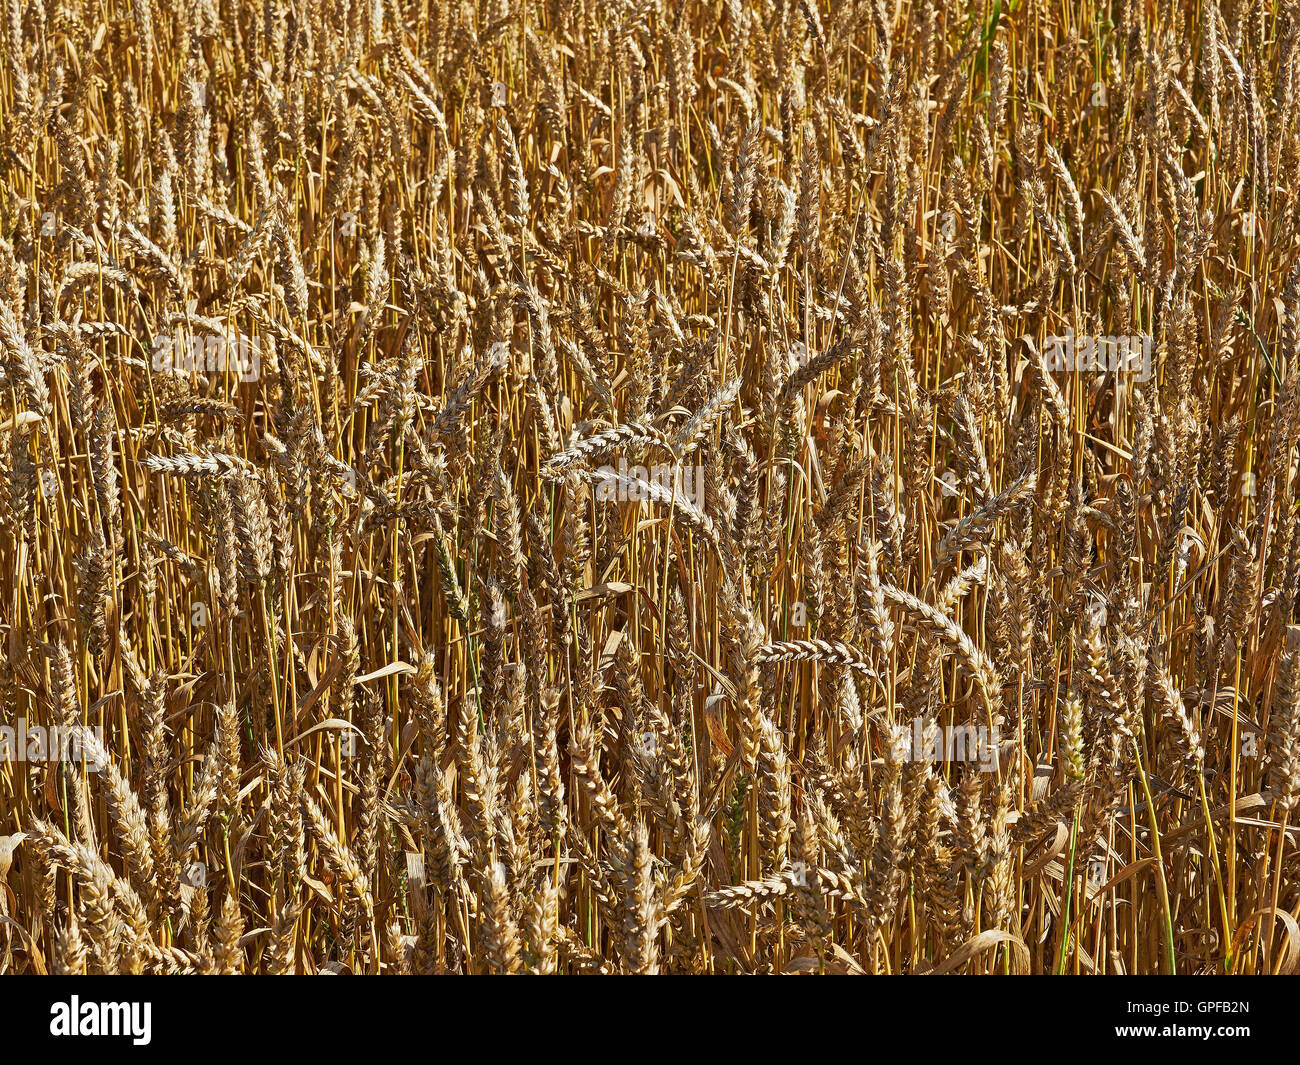 Wheat field with ripe crop in Surrey South East England Stock Photo